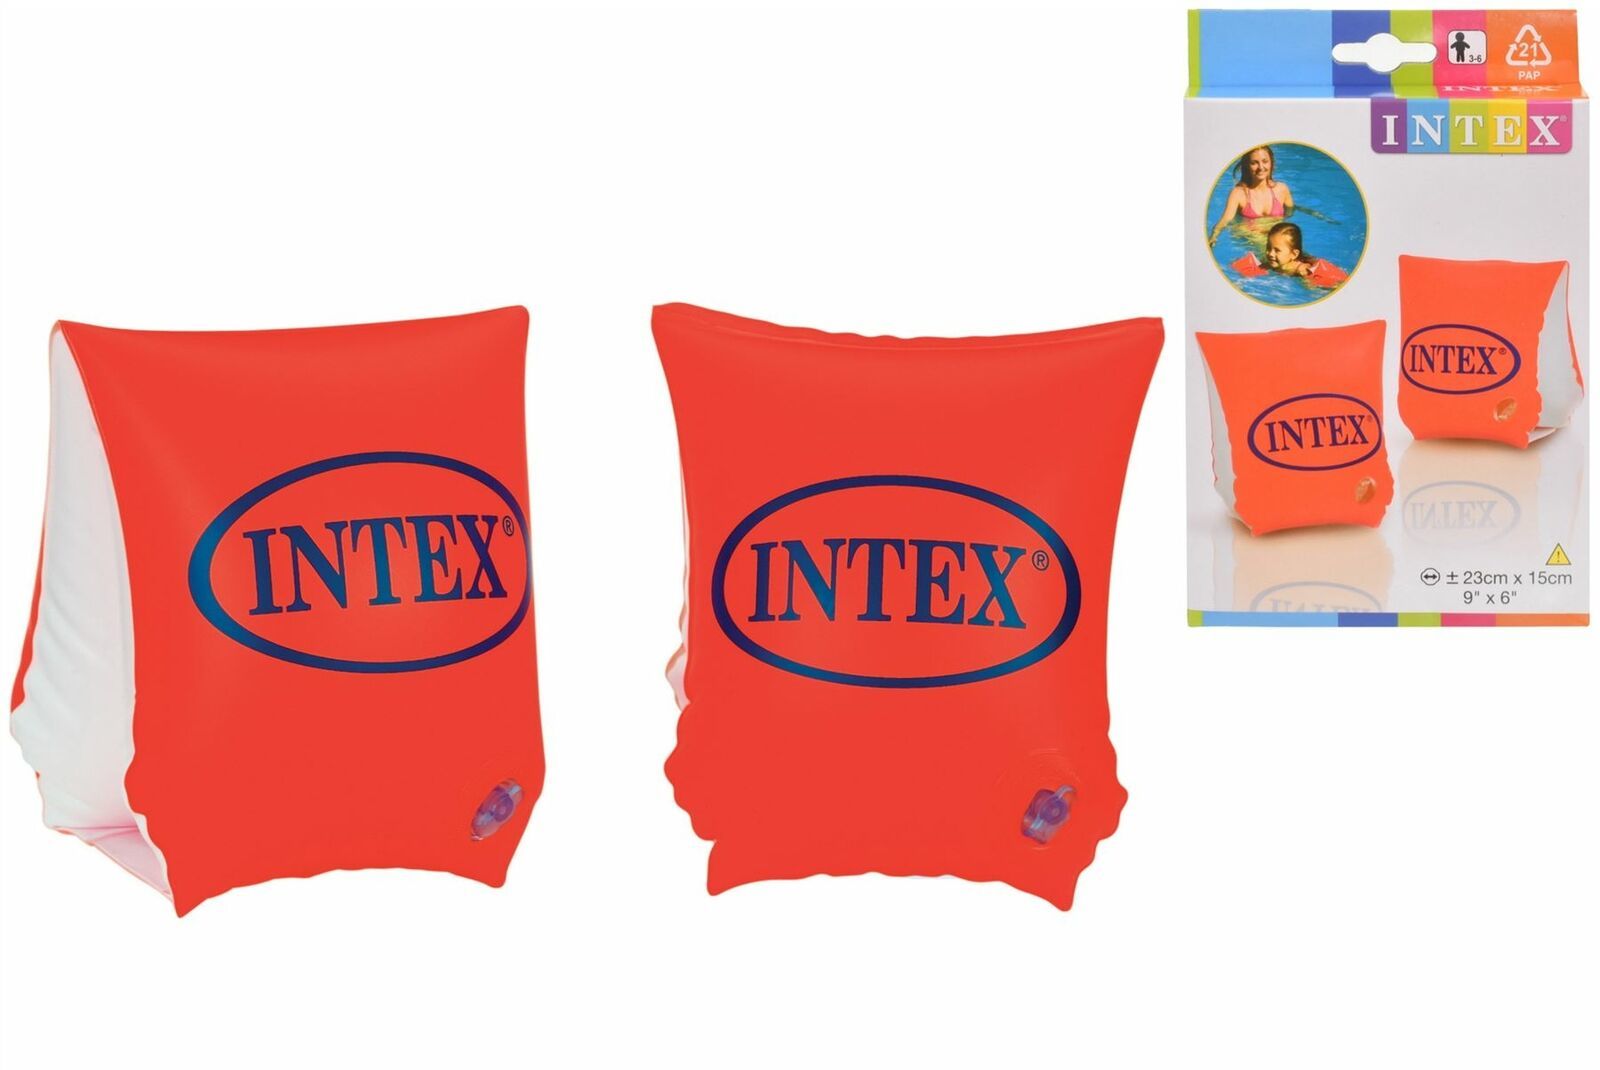 Intex: Deluxe Pool Armbands - Ages 3-6